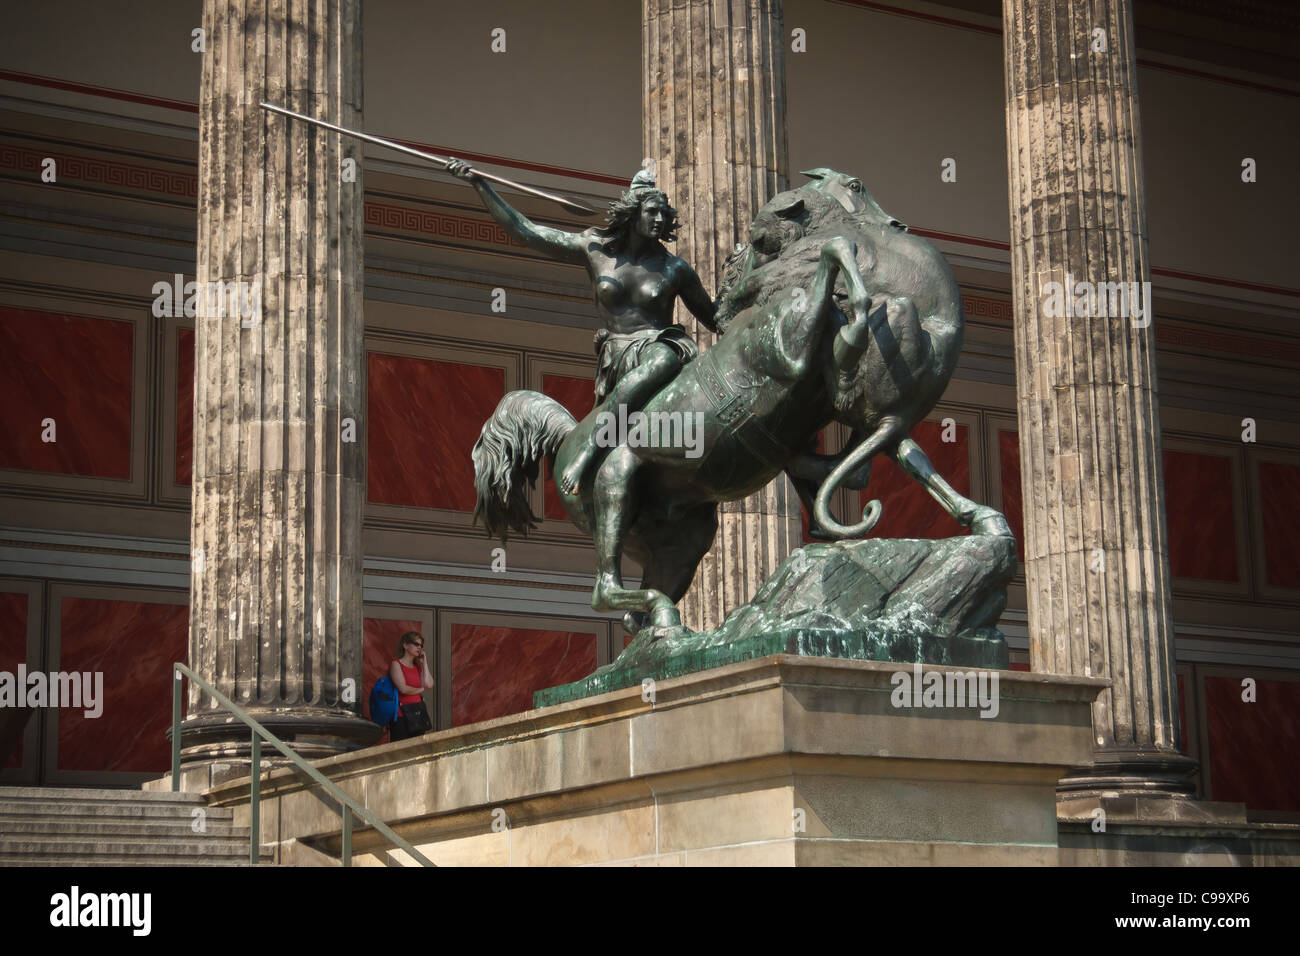 Löwenkämpfer - bronze sculpture of horsewoman with spear in front of Altes Museum in Berlin Germany Stock Photo